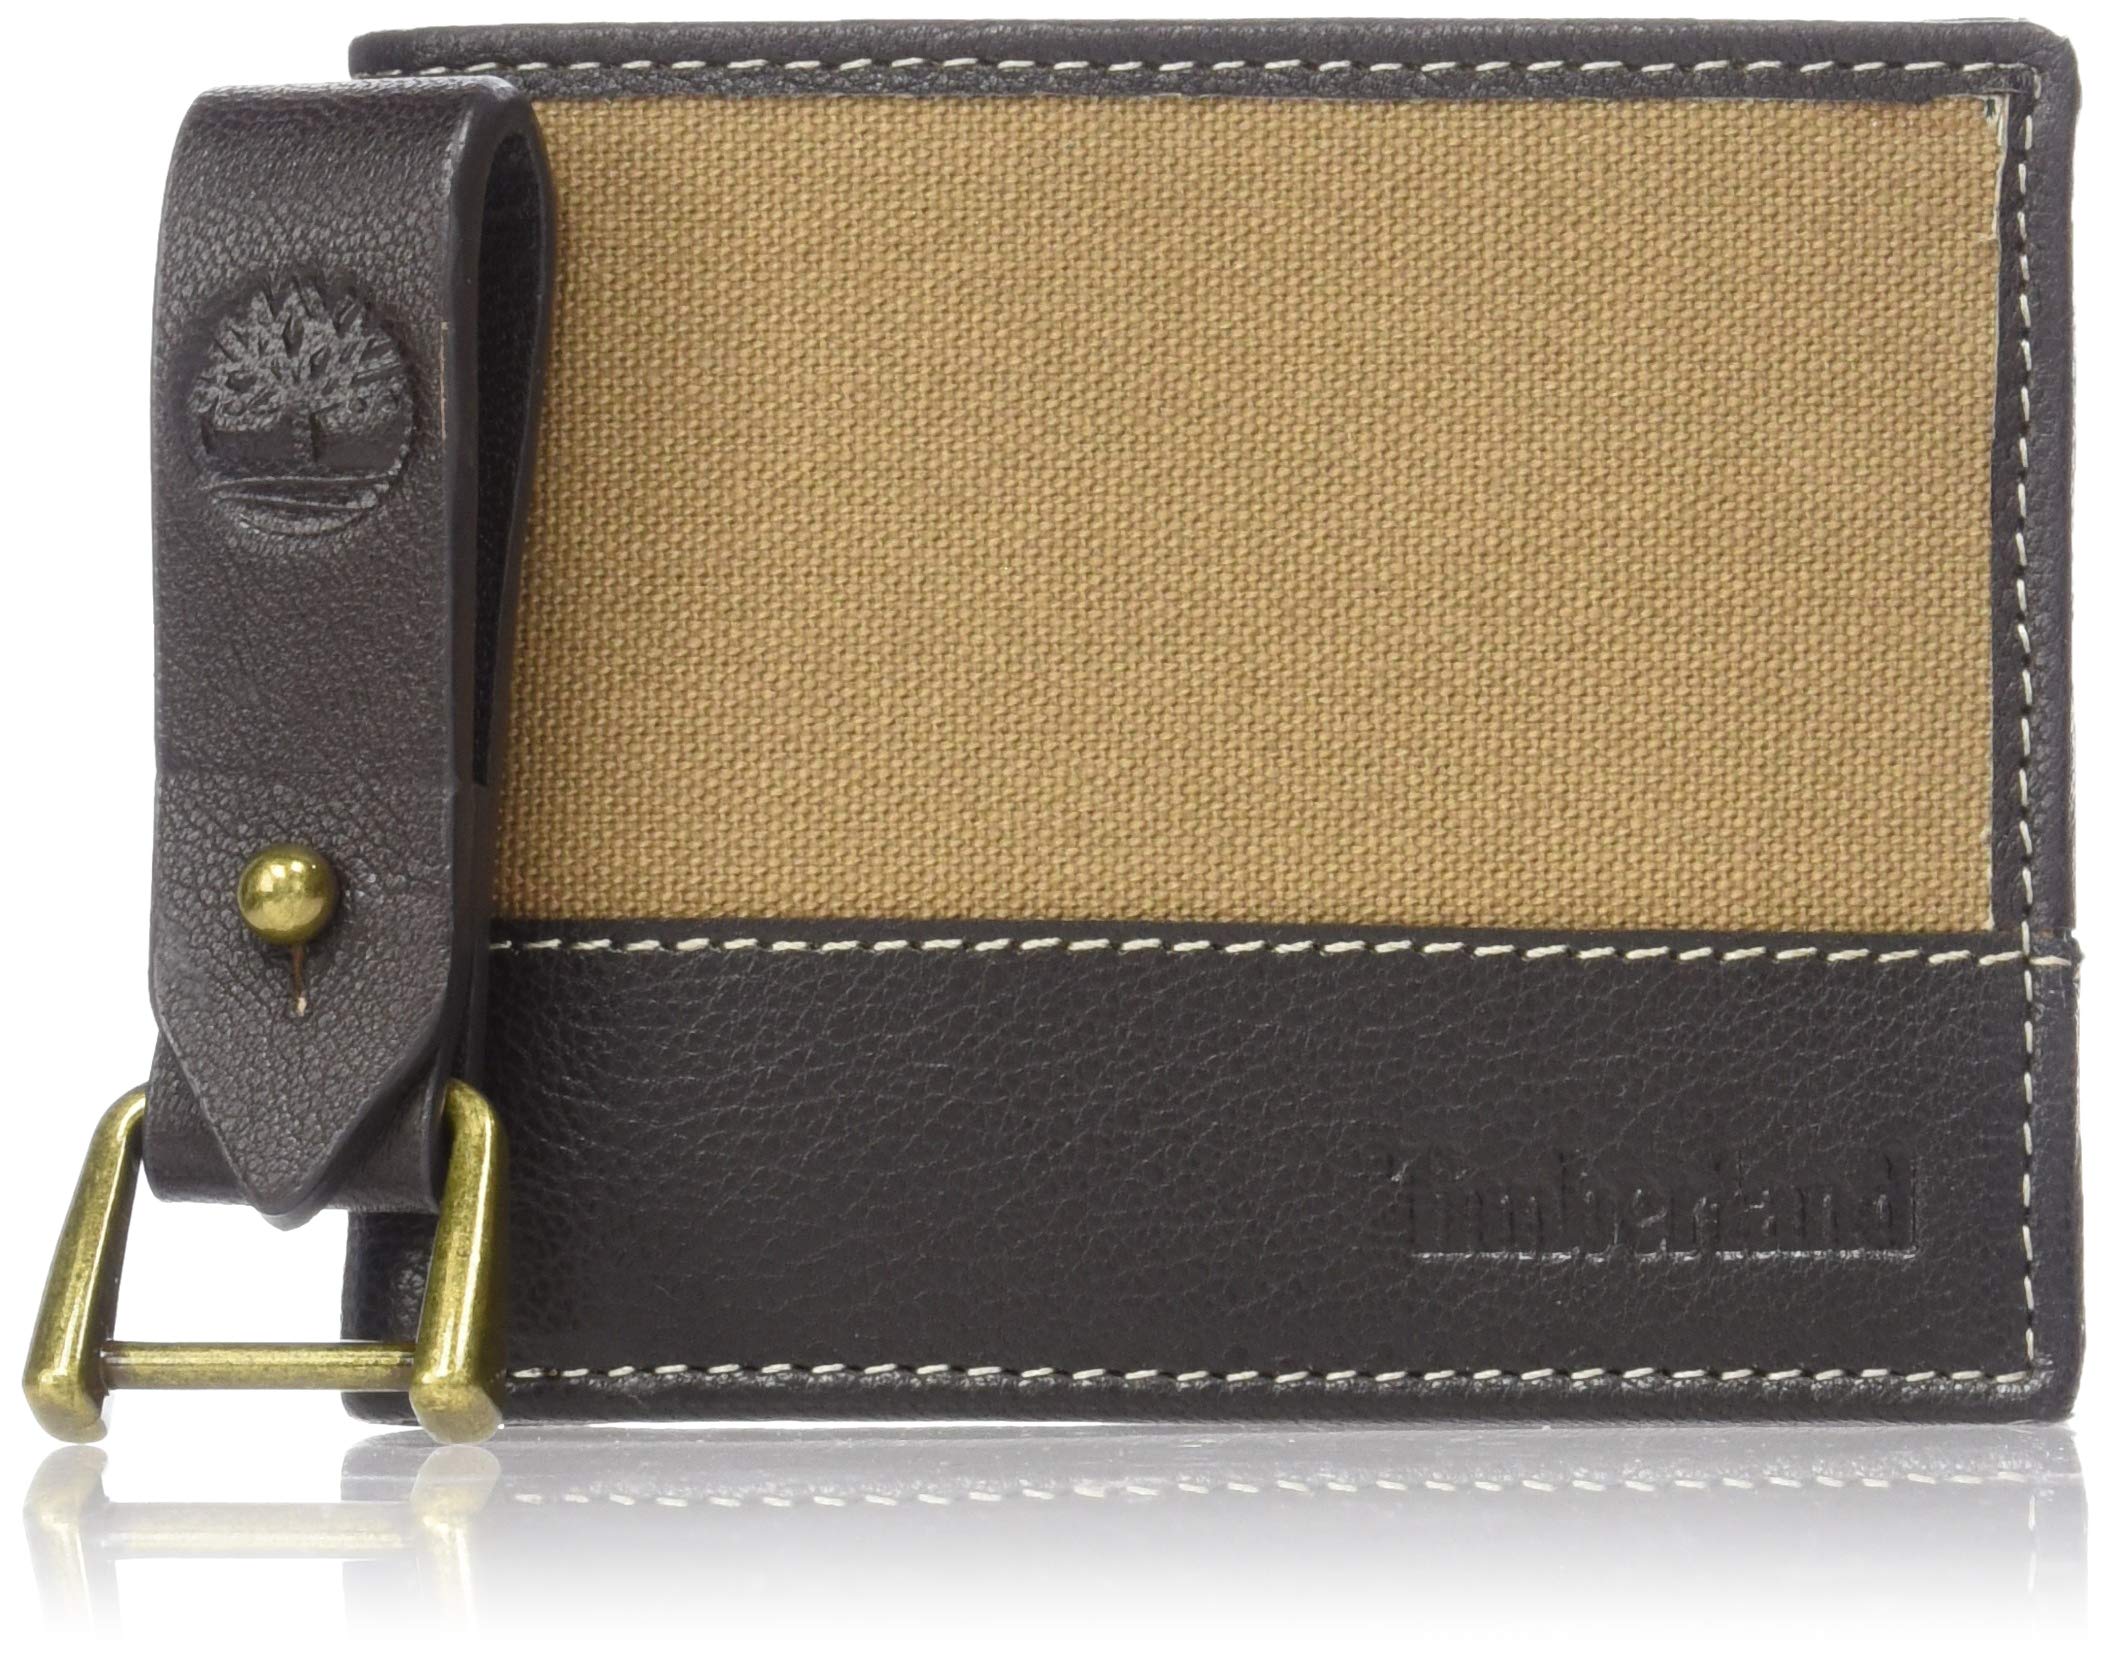 Timberland NP0379 Men's Bi-Fold Wallet, Key Holder, 2-Piece Set, Box Included, No Coin Purse